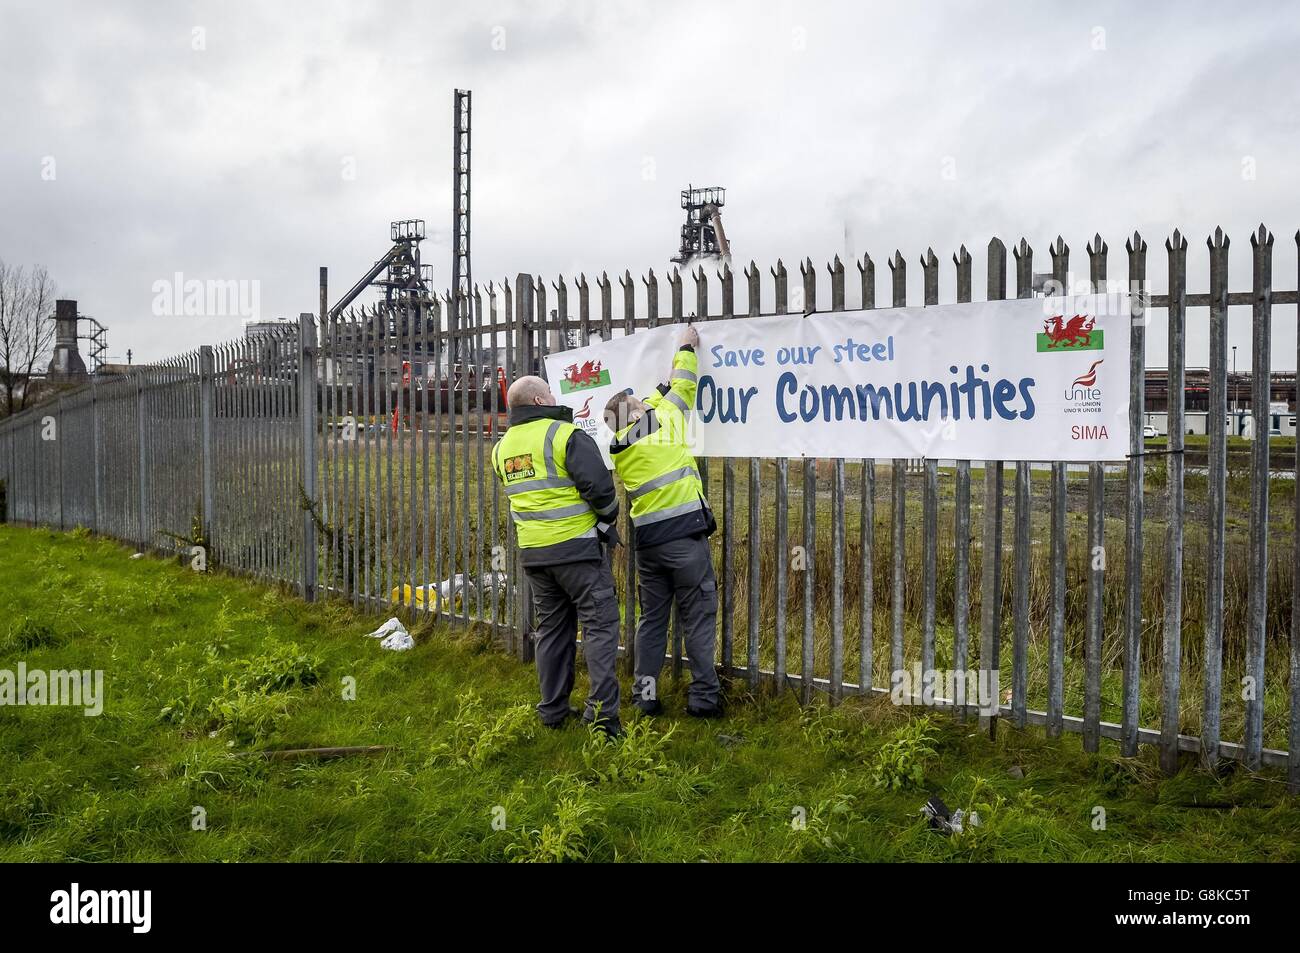 Security staff take down a Unite union banner on the fence outside the Tata steel plant on Harbour Way, Port Talbot, as the steel industry has been dealt another huge blow after Tata confirmed that more than 1,000 jobs are to be axed. Stock Photo